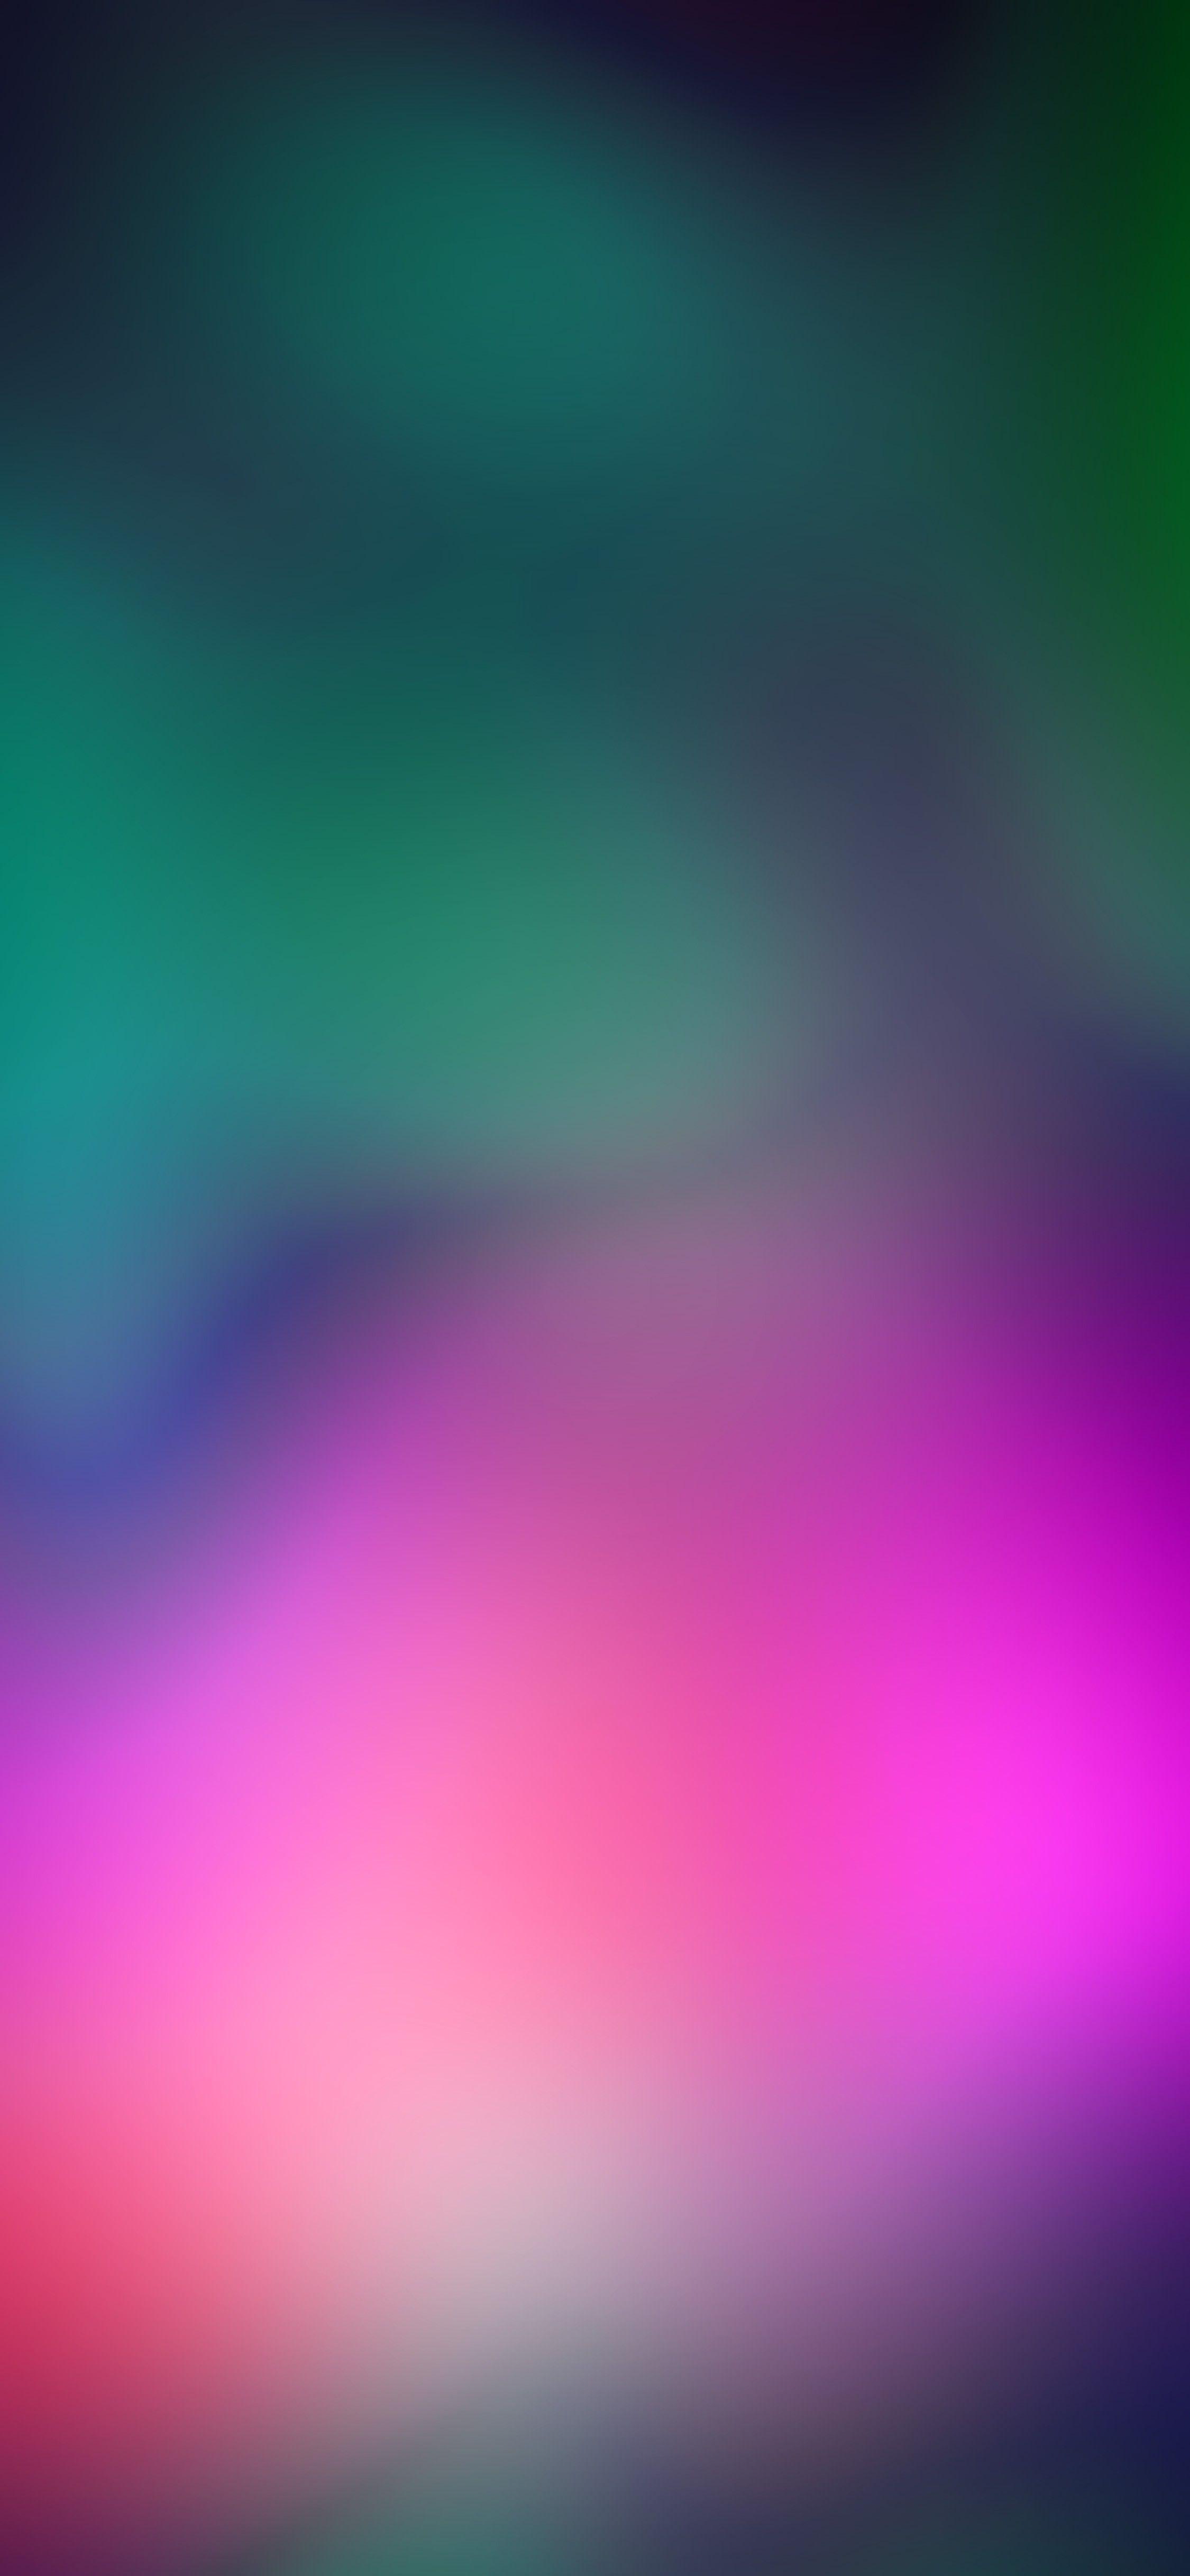 Apple iPhone X Wallpapers HD